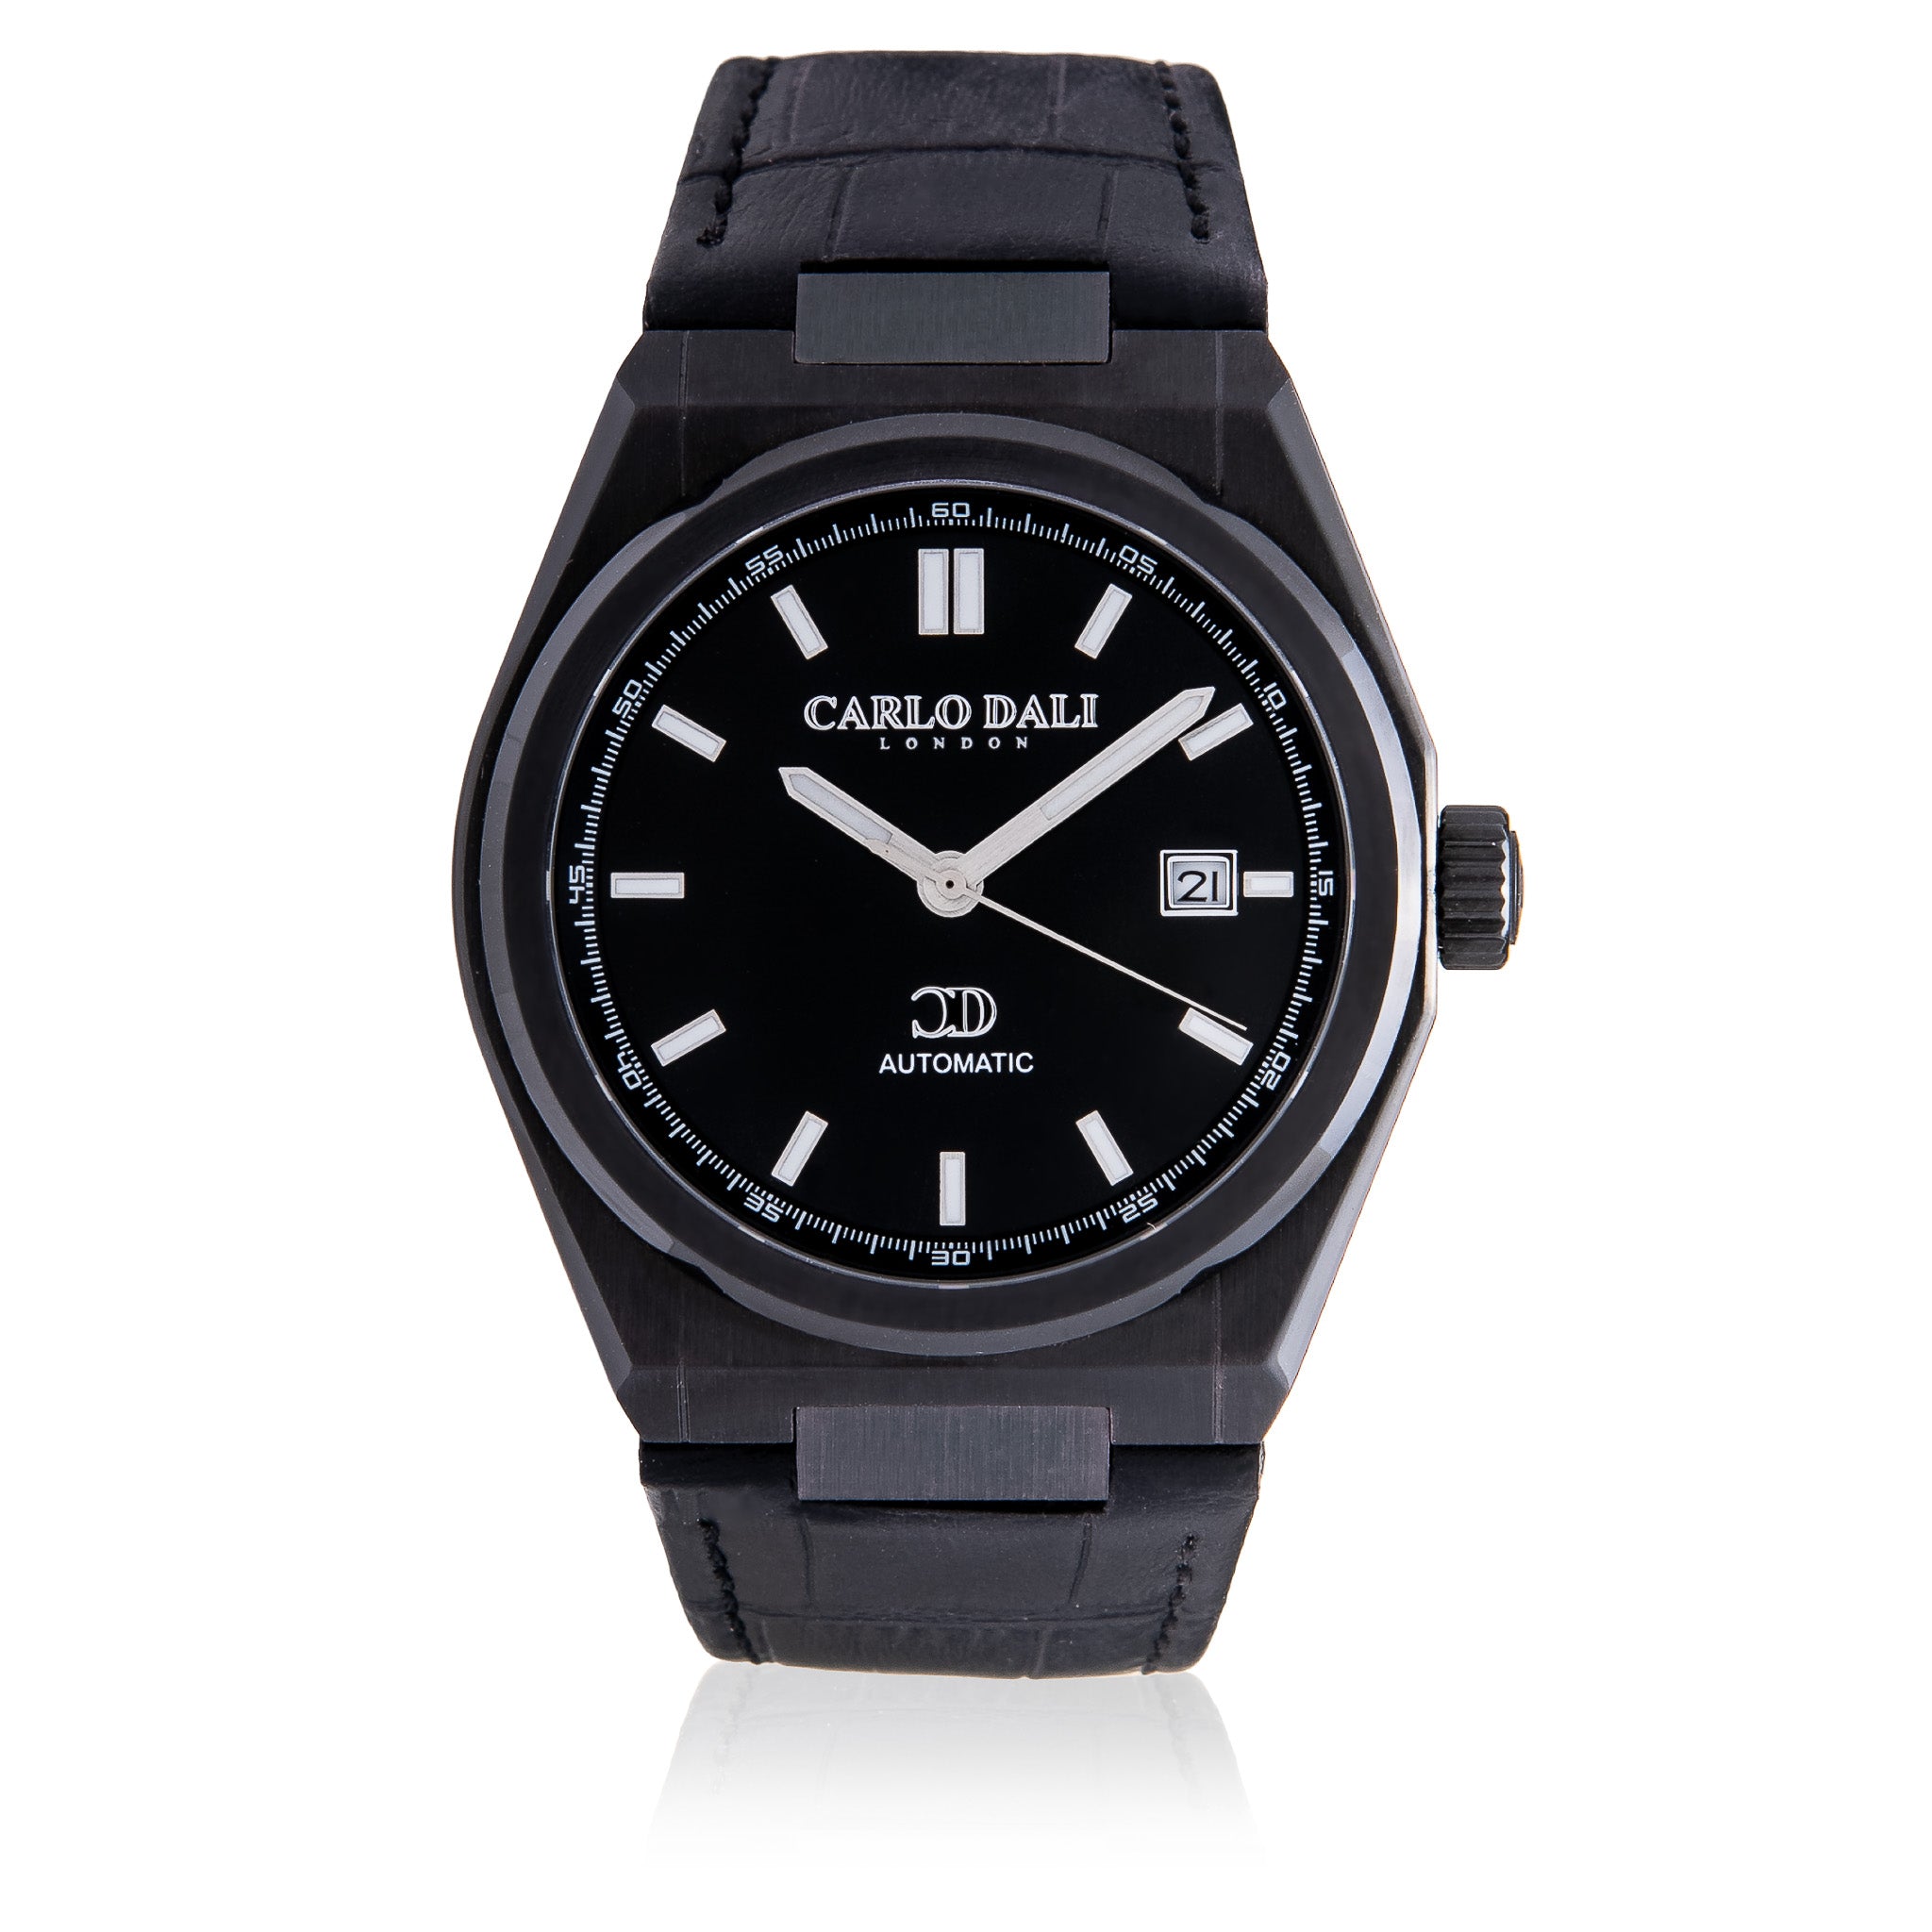 "1888 automatic" TOTAL BLACK LEATHER WATCH